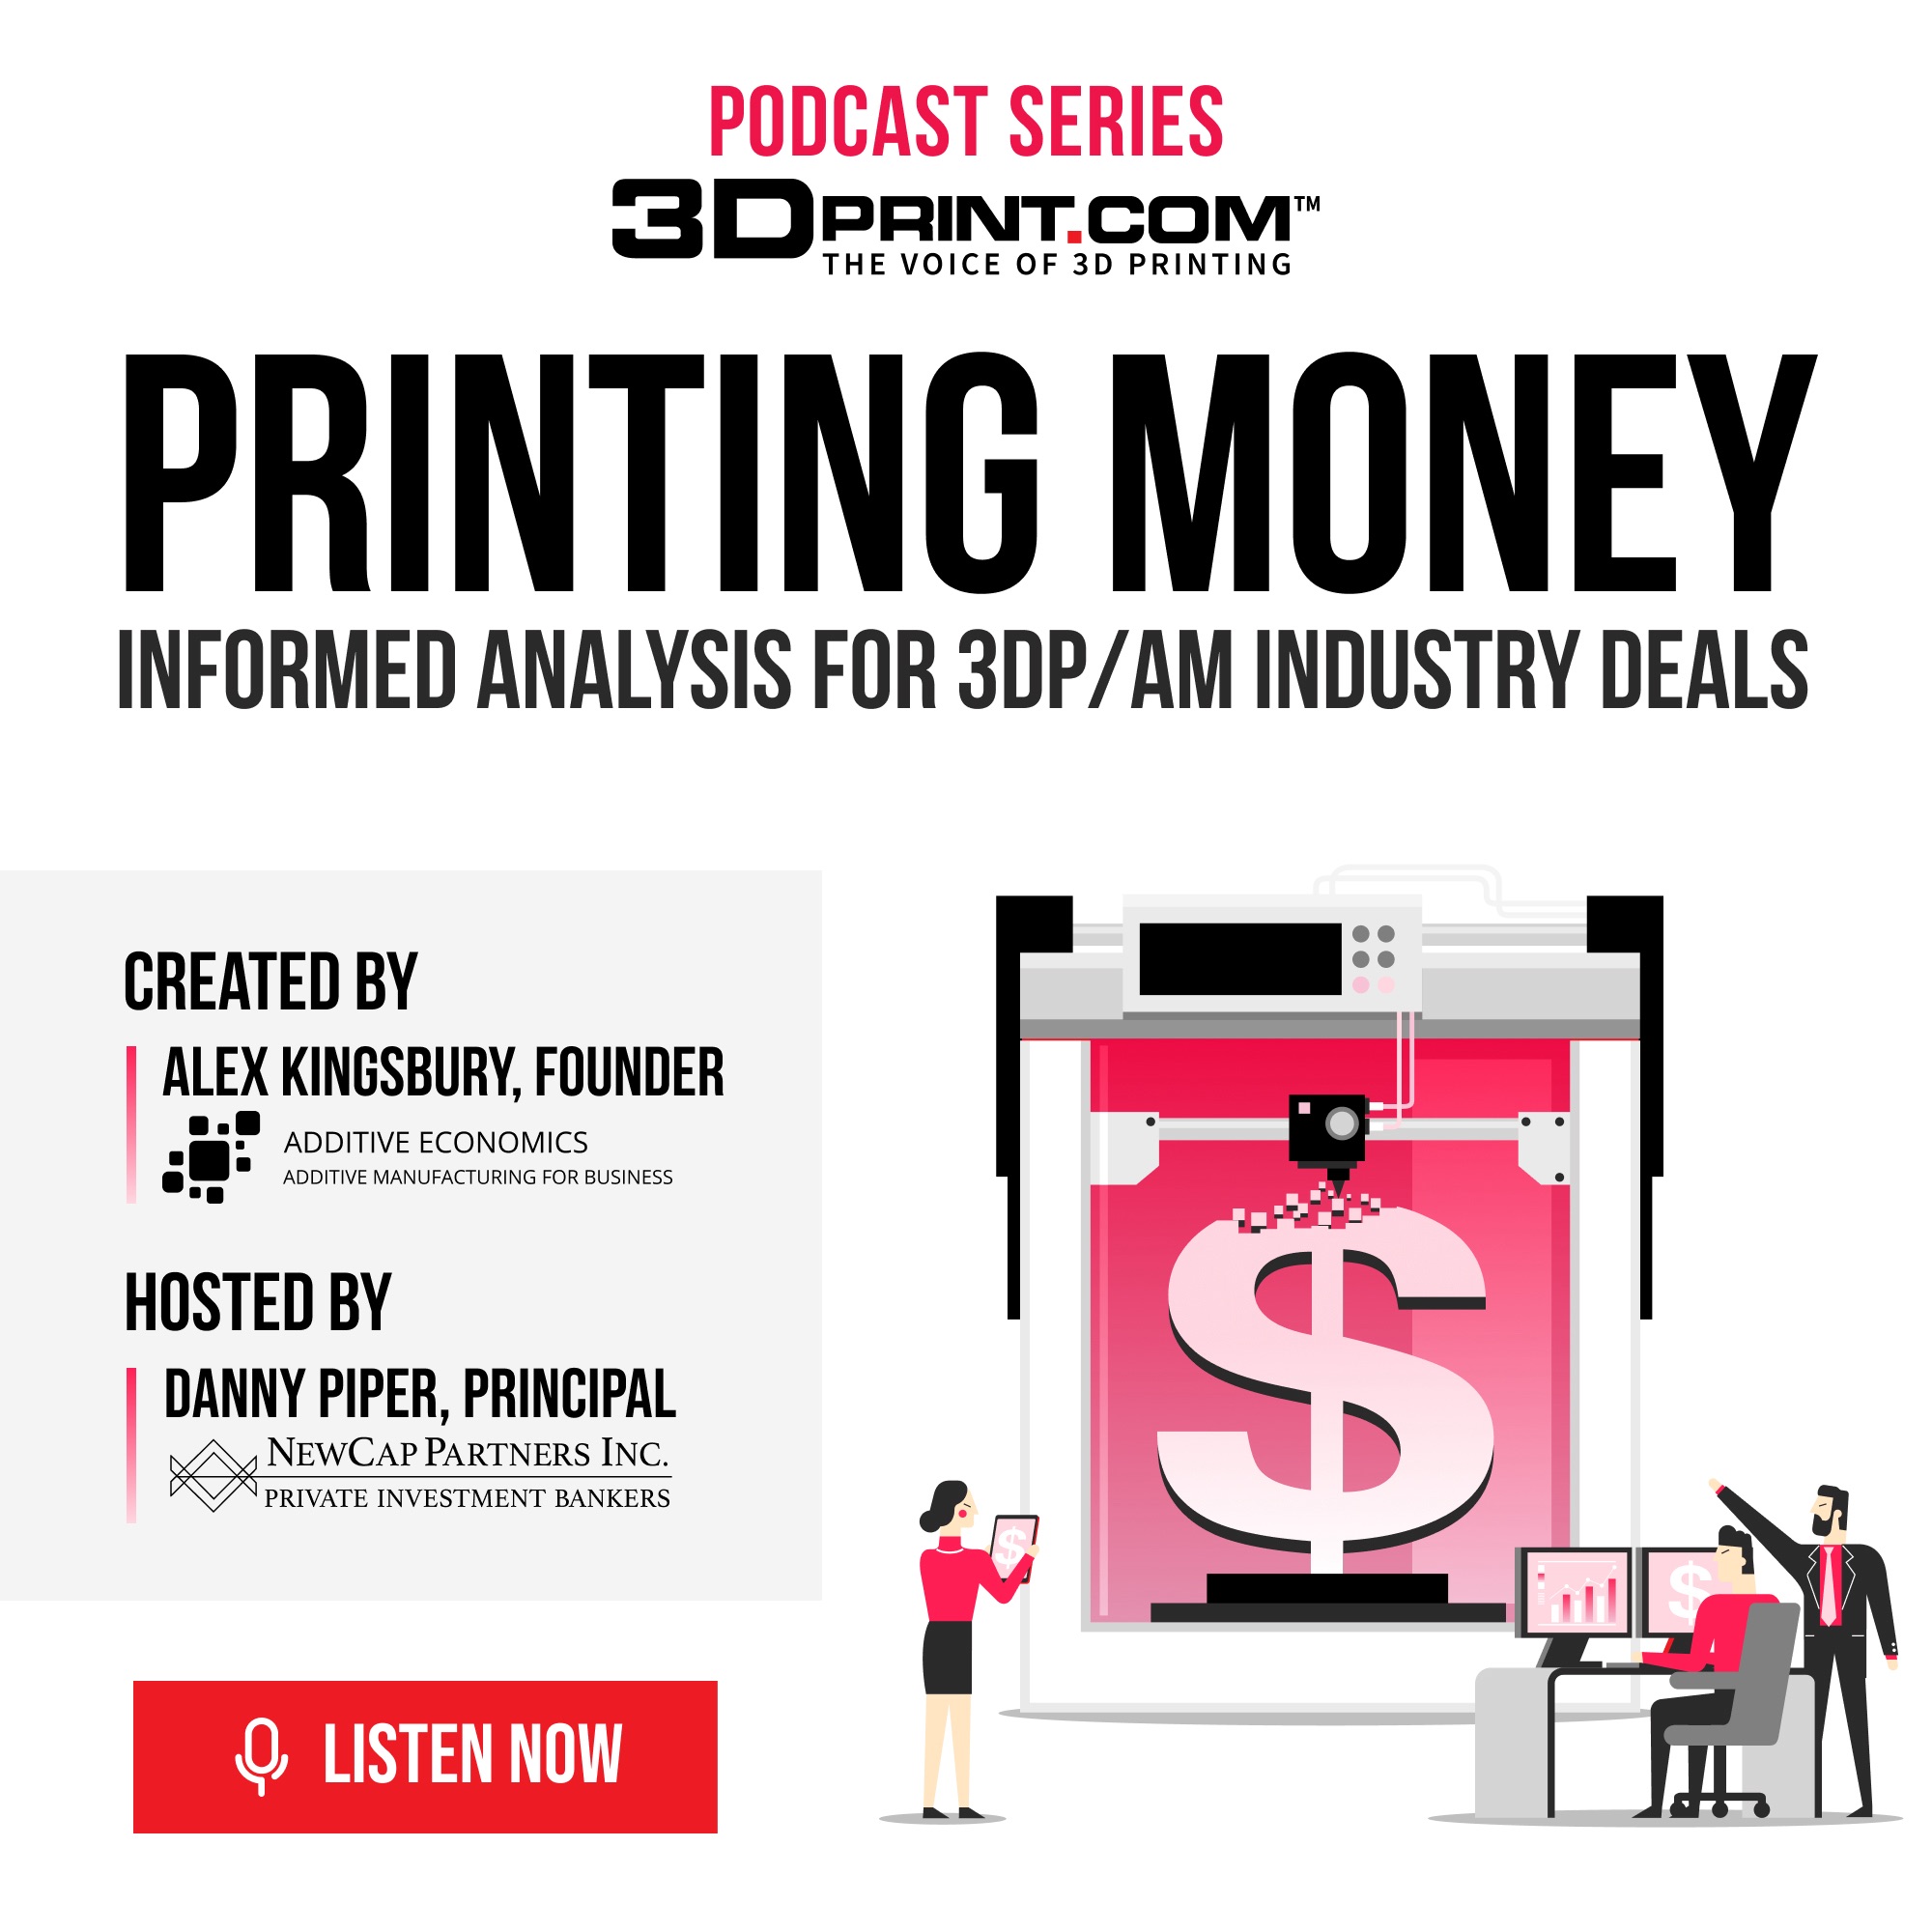 Printing Money Episode 15: 3D Printing Markets & Deals, with AM Research and AMPOWER